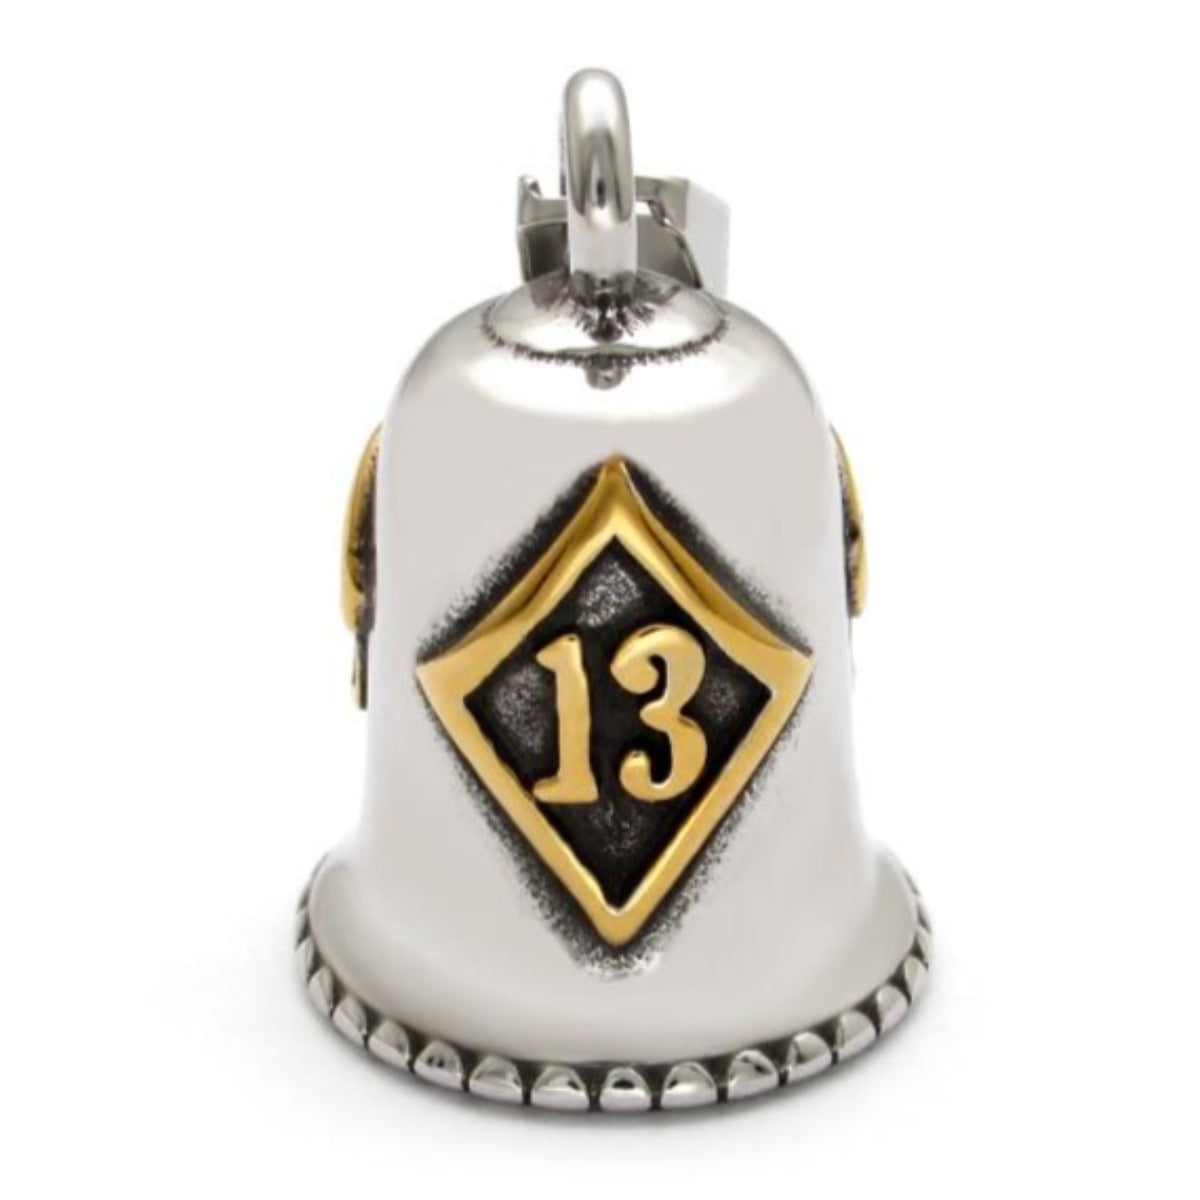 A biker's Lucky 13 Gremlin Bell with the number 13 on it.